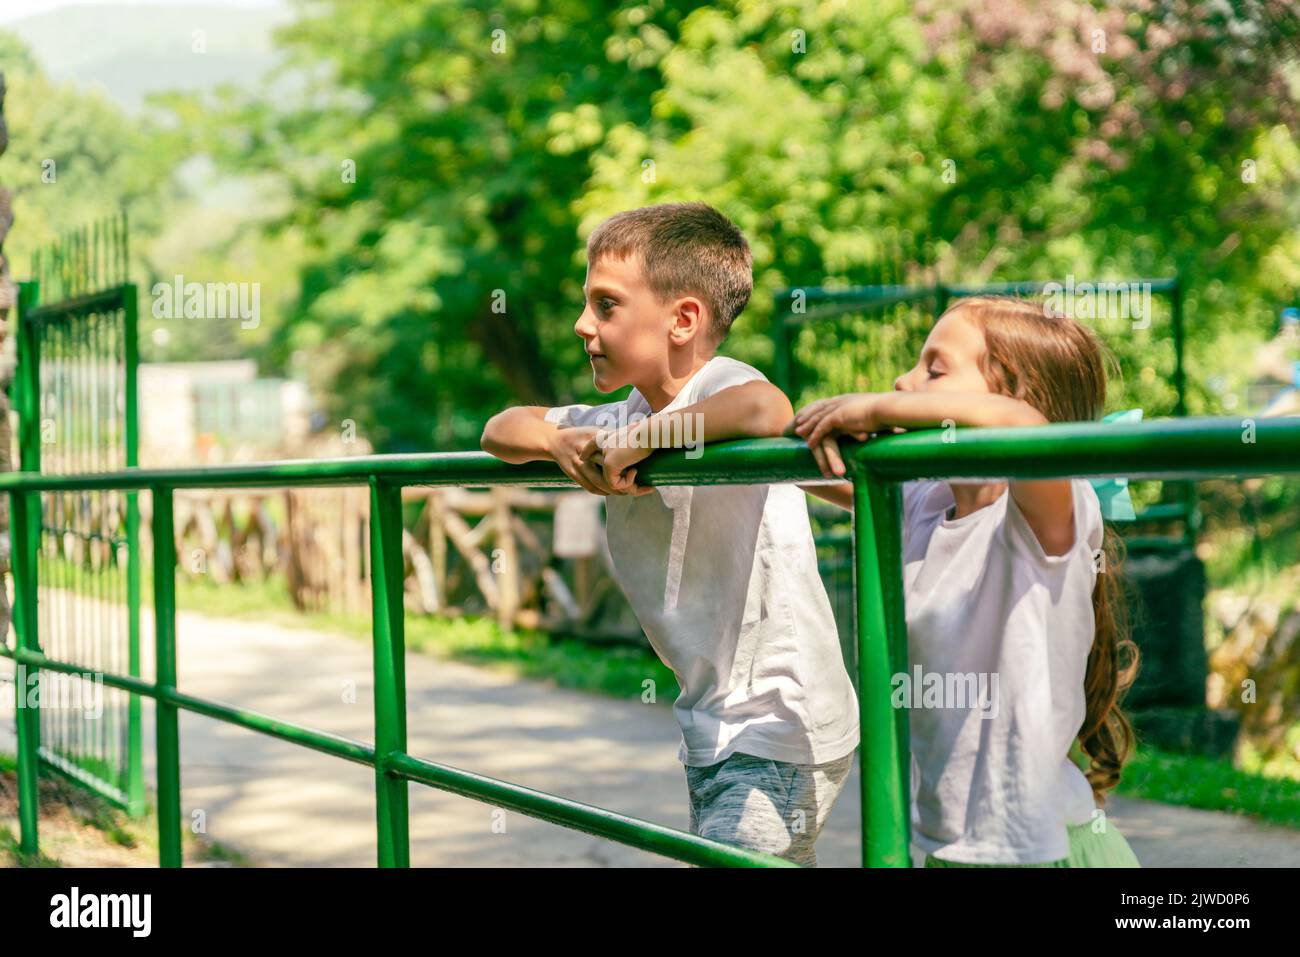 Children are watching the animals in the zoo leaning against the fence. Trees and greenery in the background Stock Photo